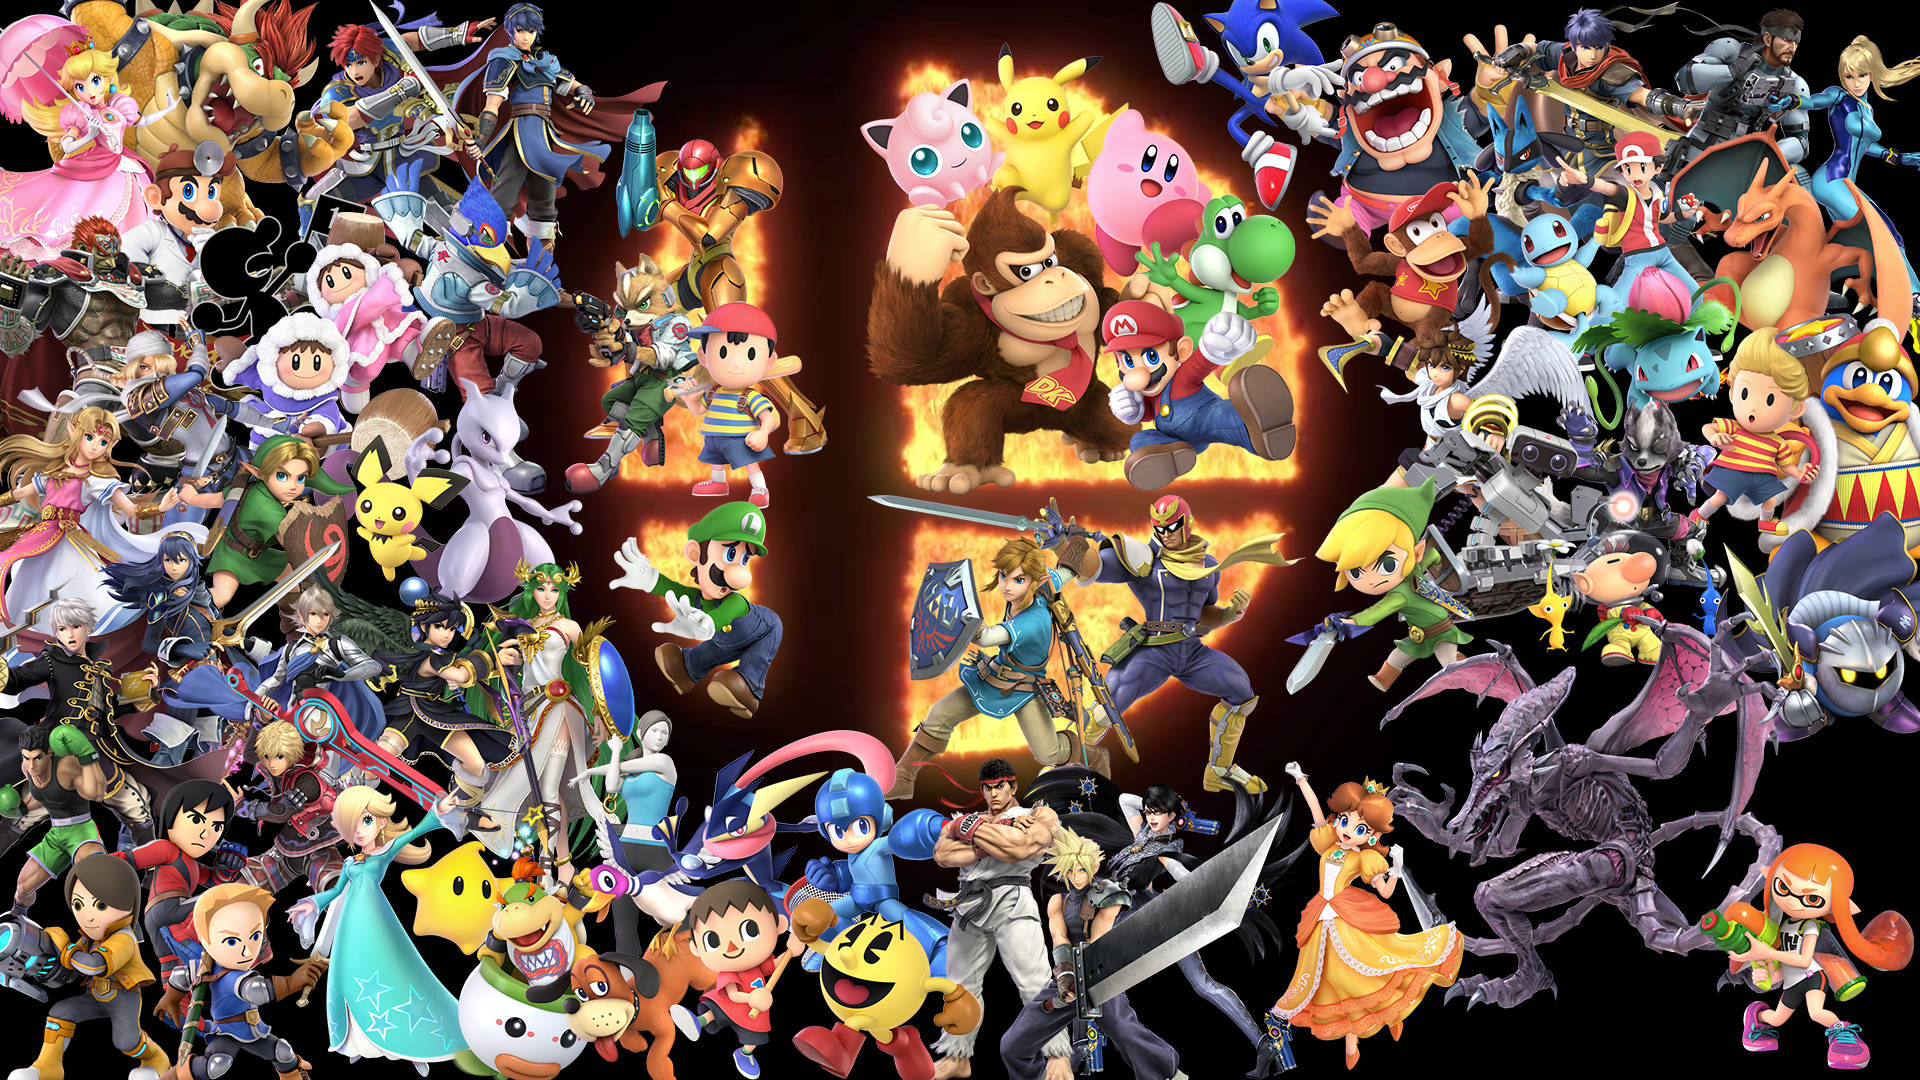 Gather around and join the fray with Super Smash Bros Ultimate Wallpaper